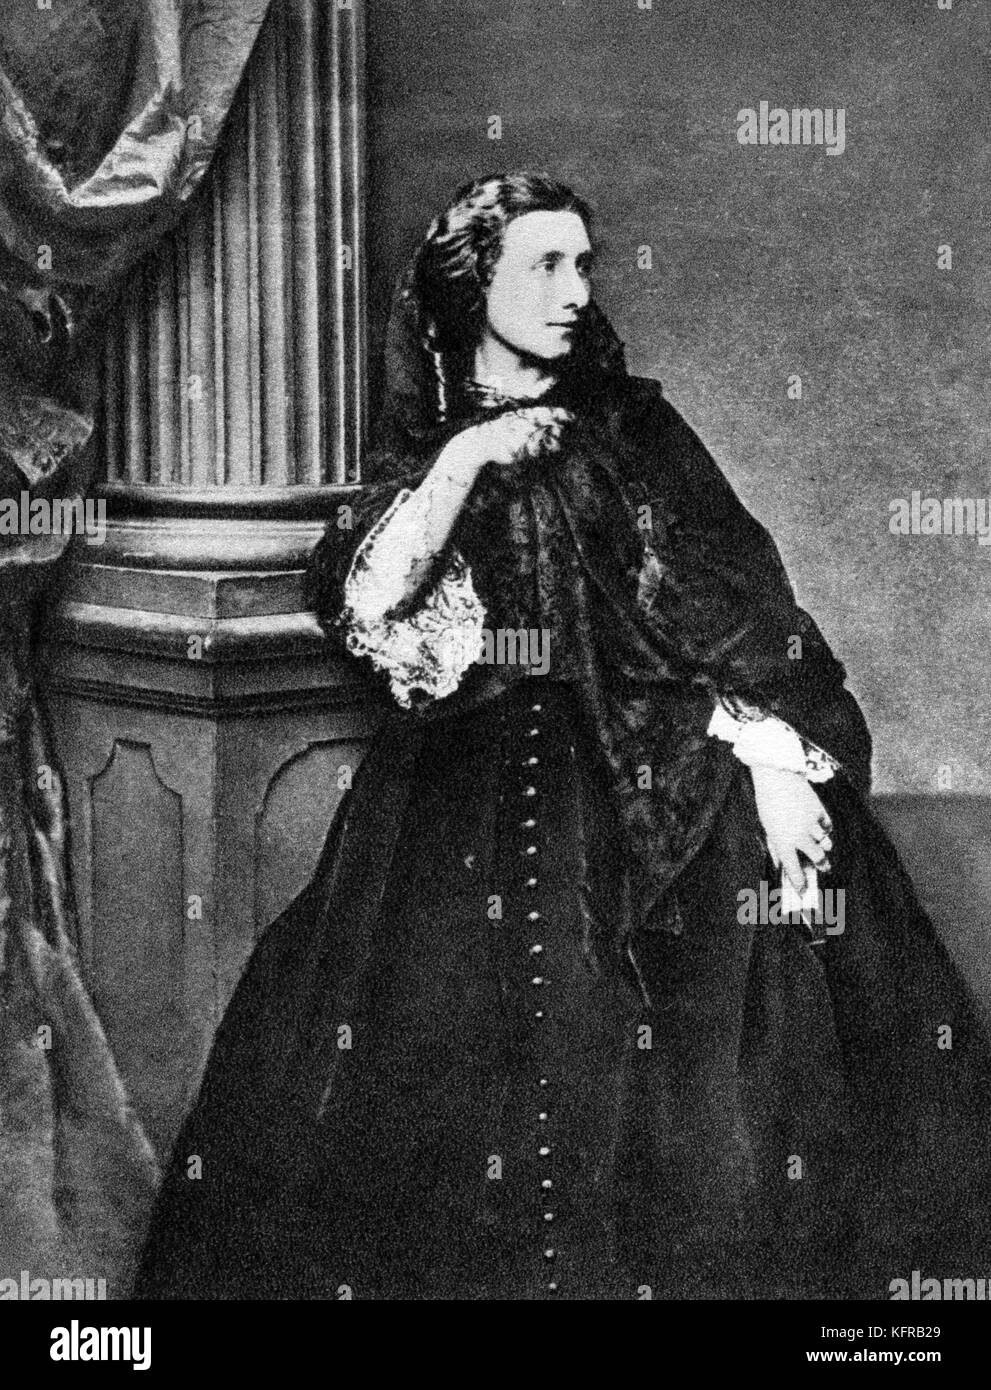 Blandine Liszt - portrait, c. 1857. Daughter of Franz Liszt, 1835 - 1862. FL: Hungarian pianist and composer,  22 October 1811 - 31 July 1886. Stock Photo